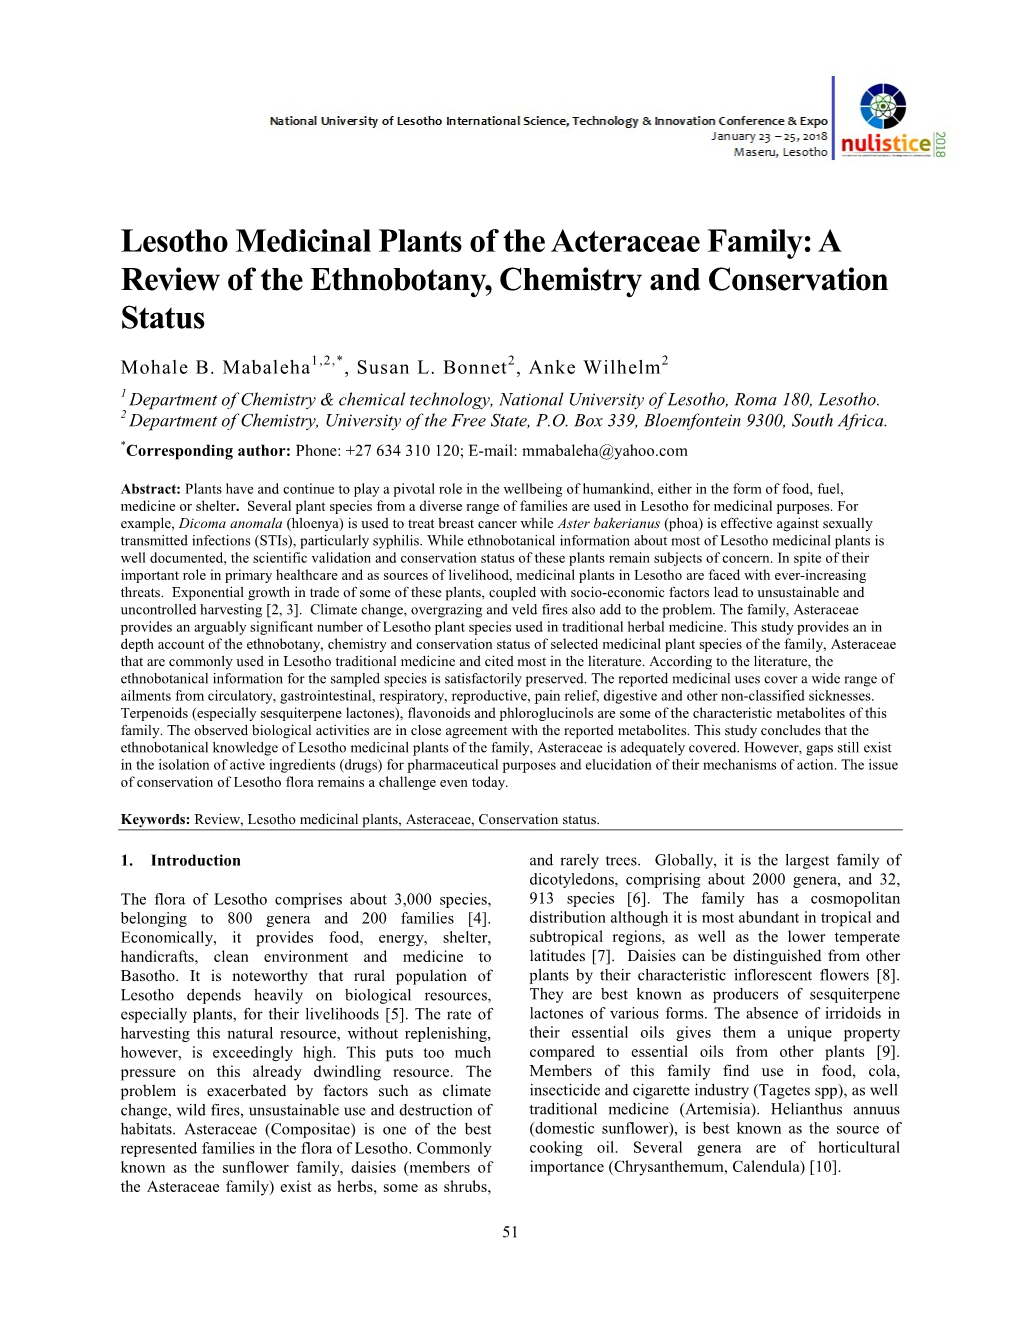 Lesotho Medicinal Plants of the Acteraceae Family: a Review of the Ethnobotany, Chemistry and Conservation Status Mohale B